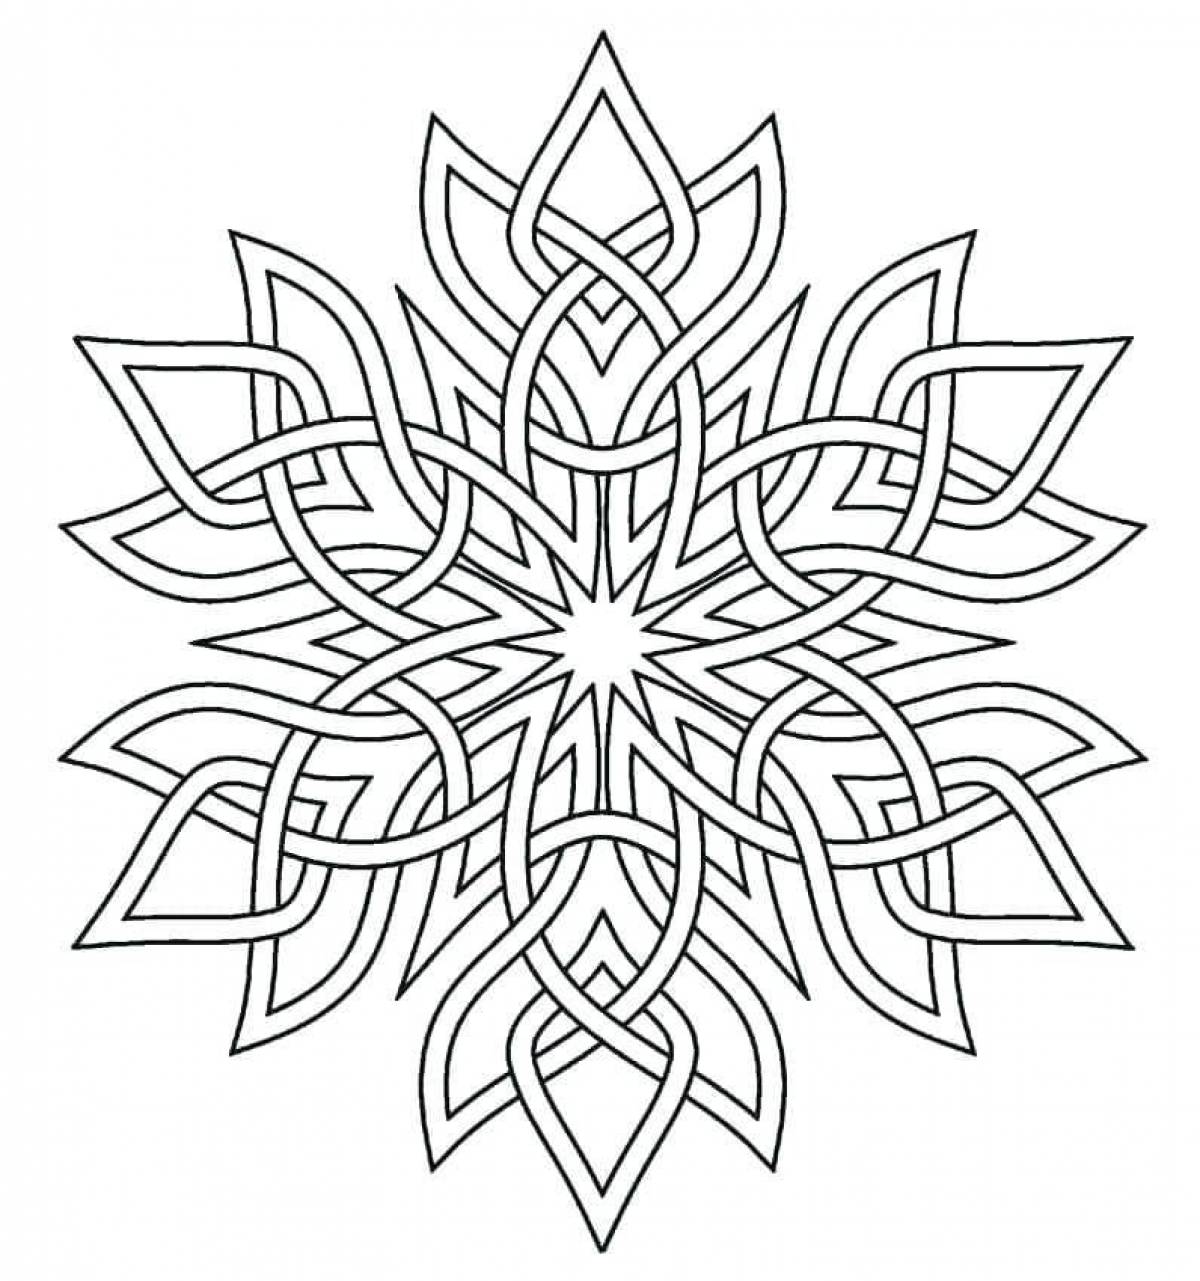 Dazzling snowflake coloring book for kids 5-6 years old